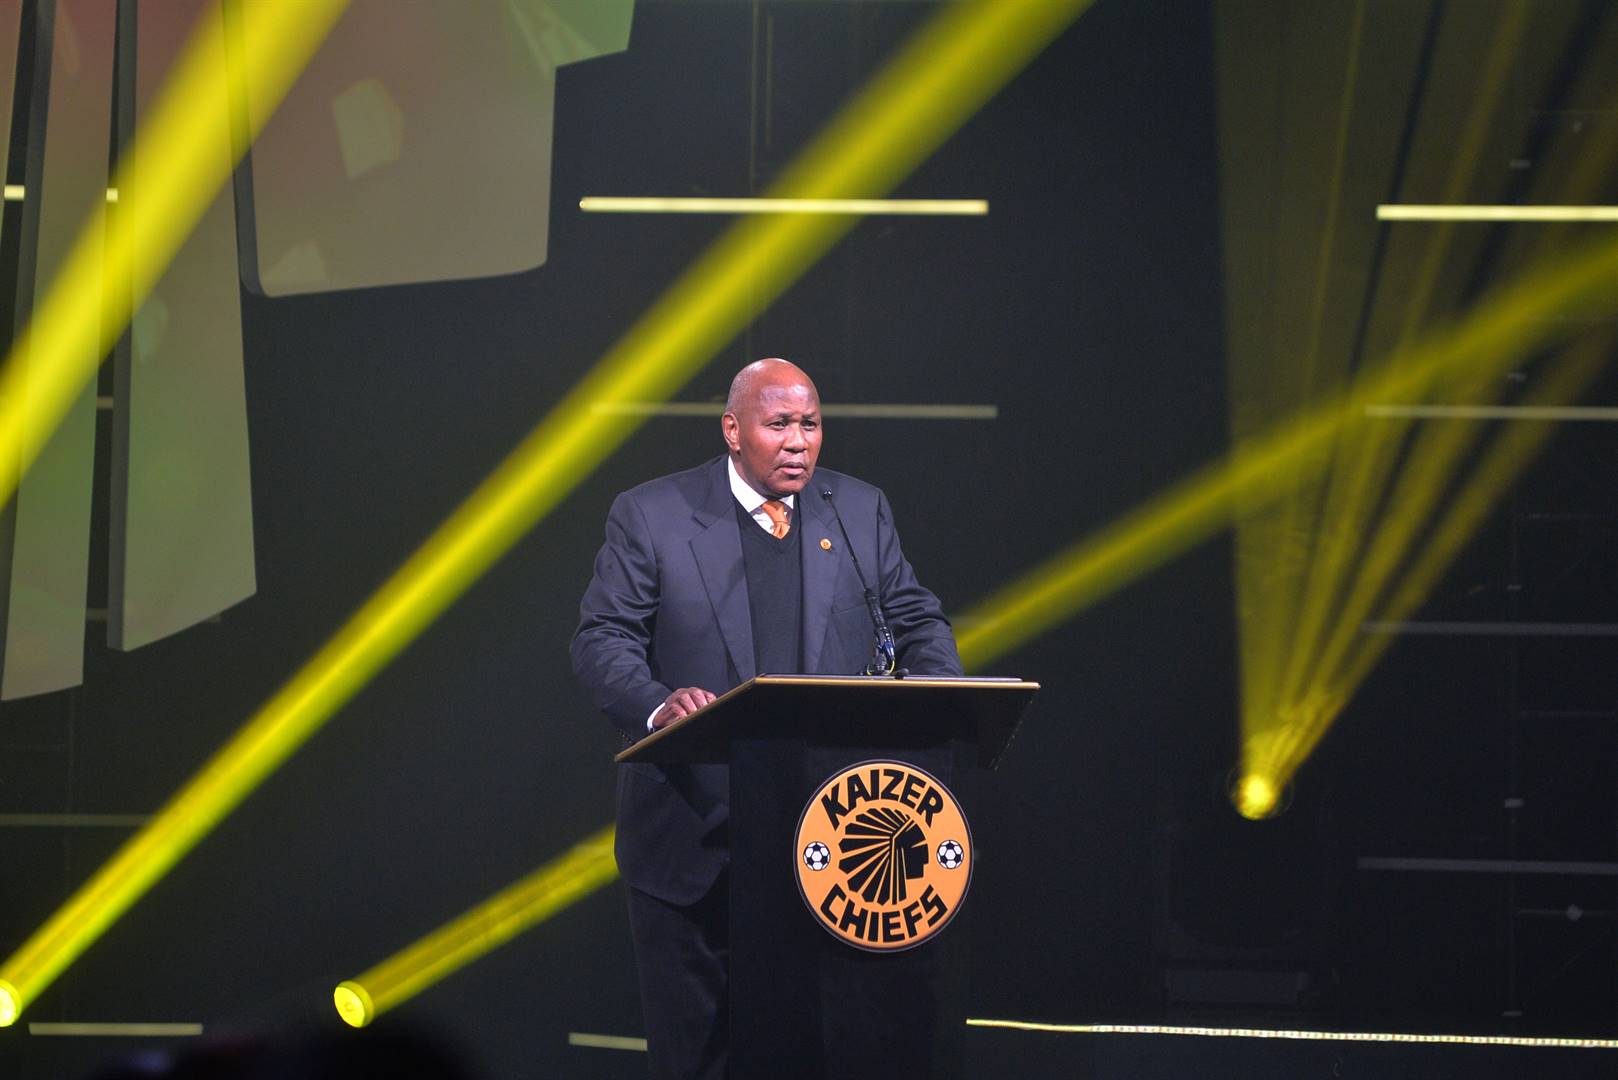 Kaizer Motaung will be honoured with a doctorate by the University of Cape Town. Photo: Lefty Shivambu/Gallo Images